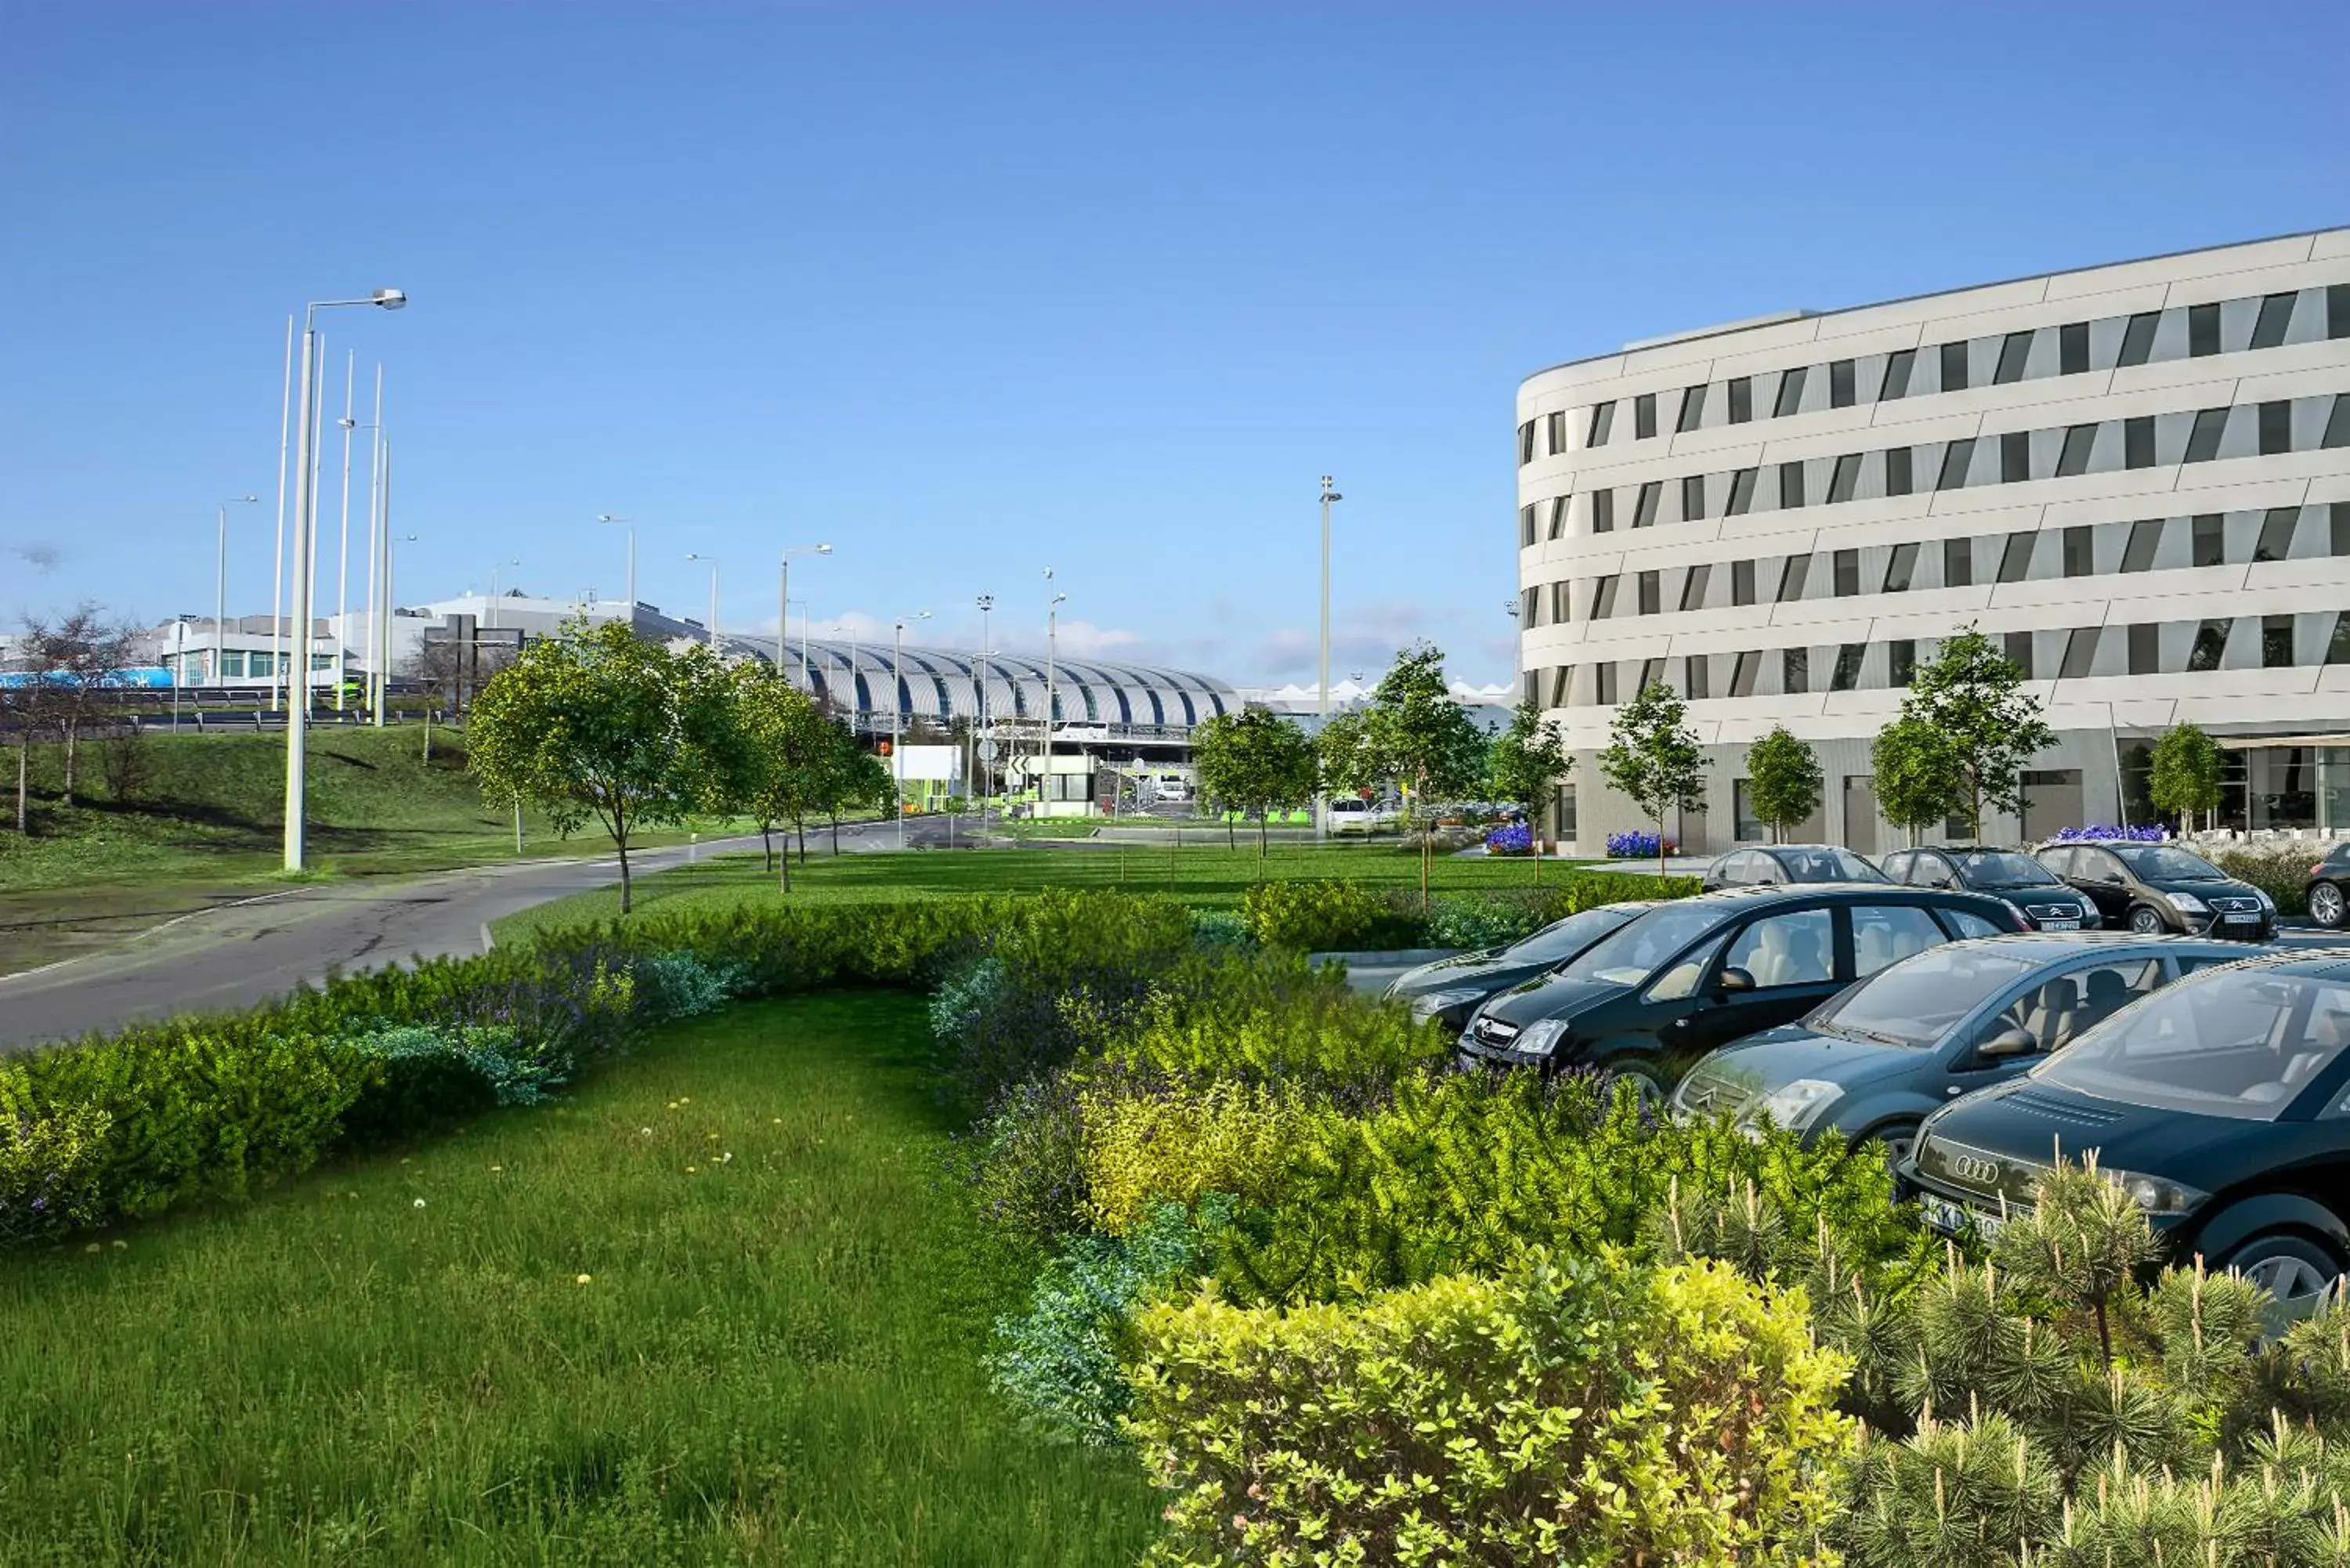 Property Building in ibis Styles Budapest Airport